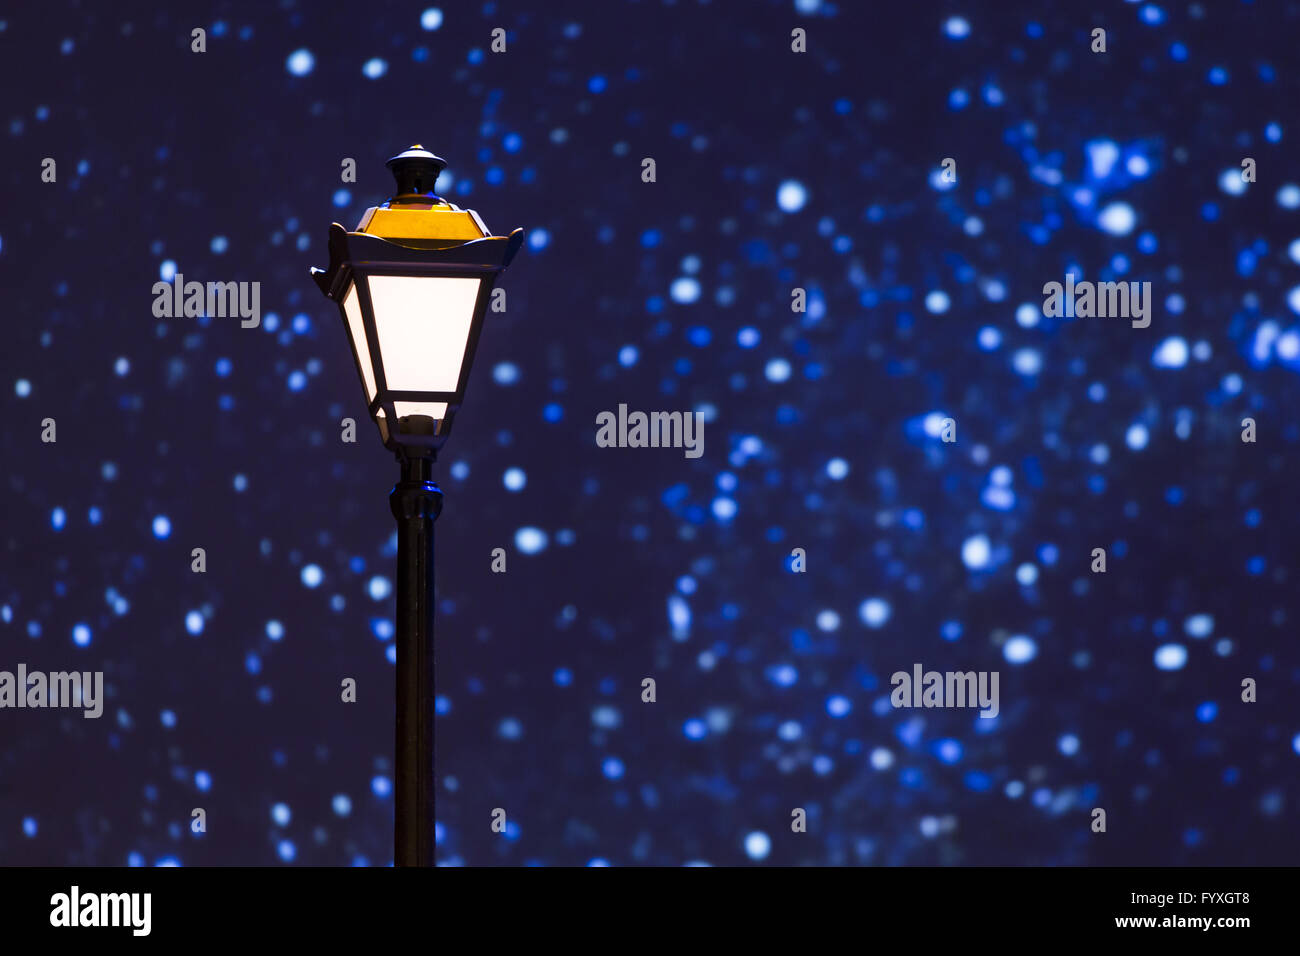 Lampe rue night sky stars Banque D'Images